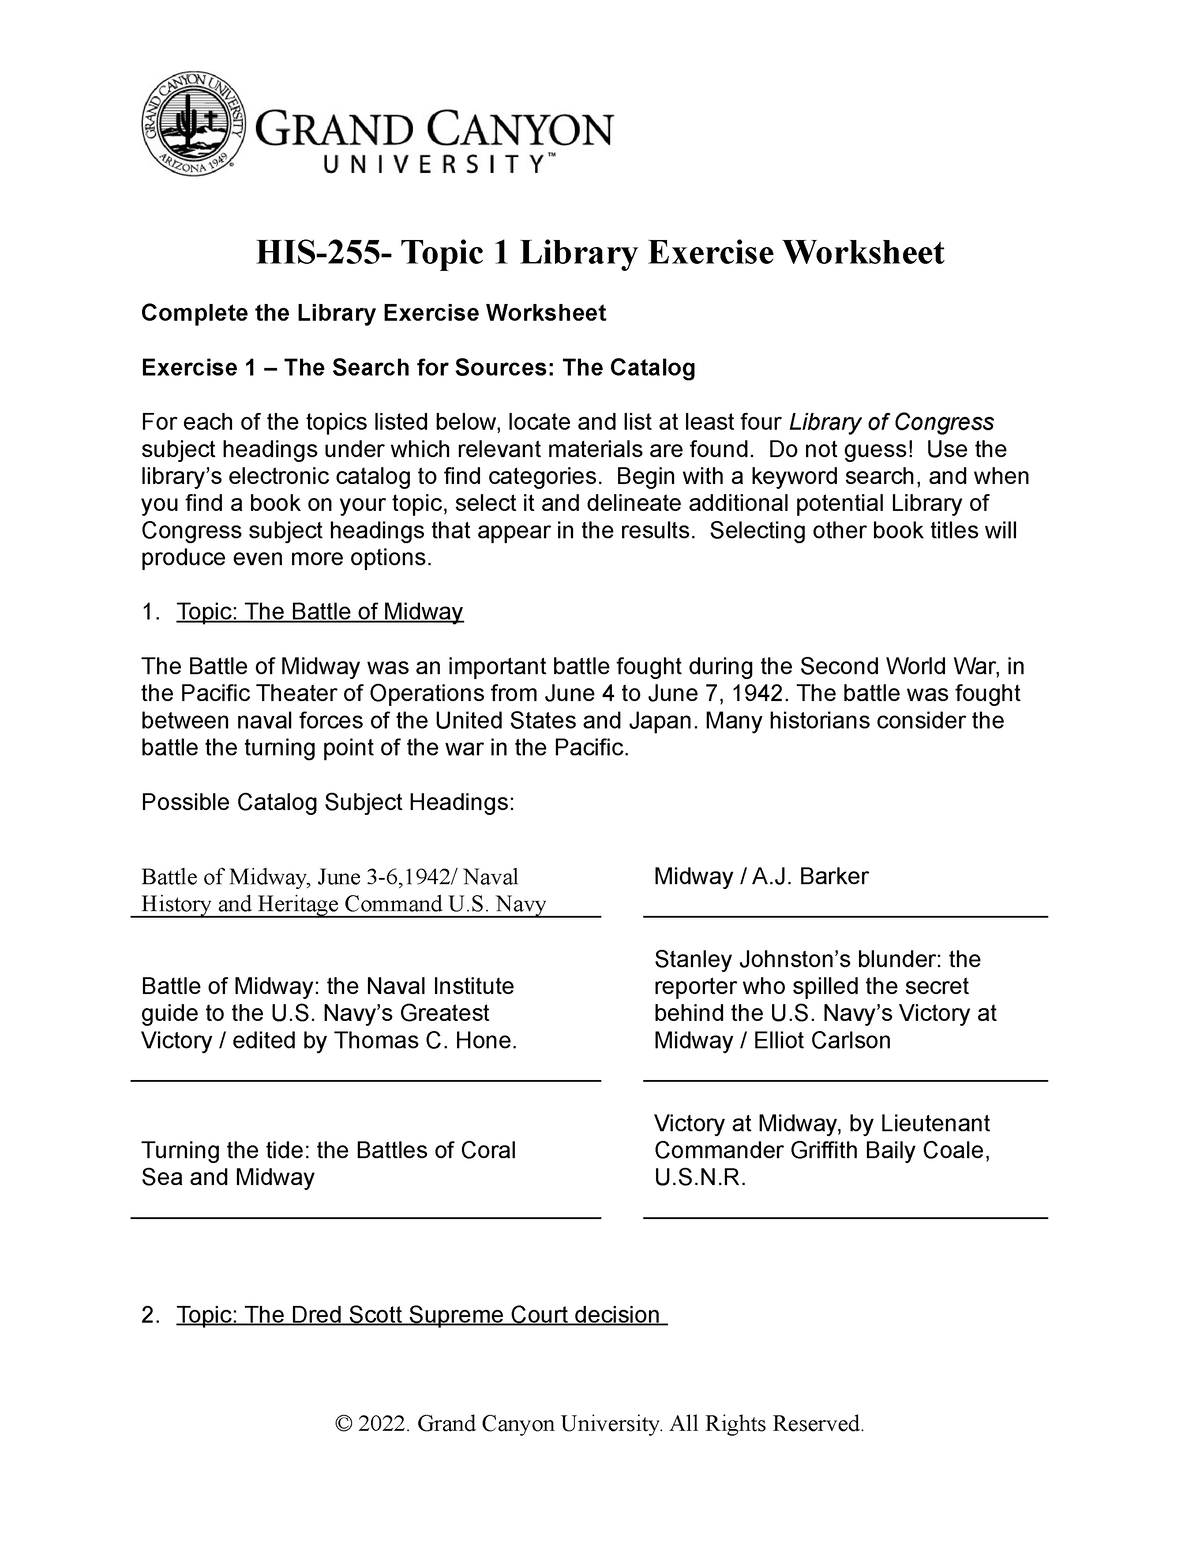 his-255-topic-1-library-exercise-worksheet-topic-1-library-exercise